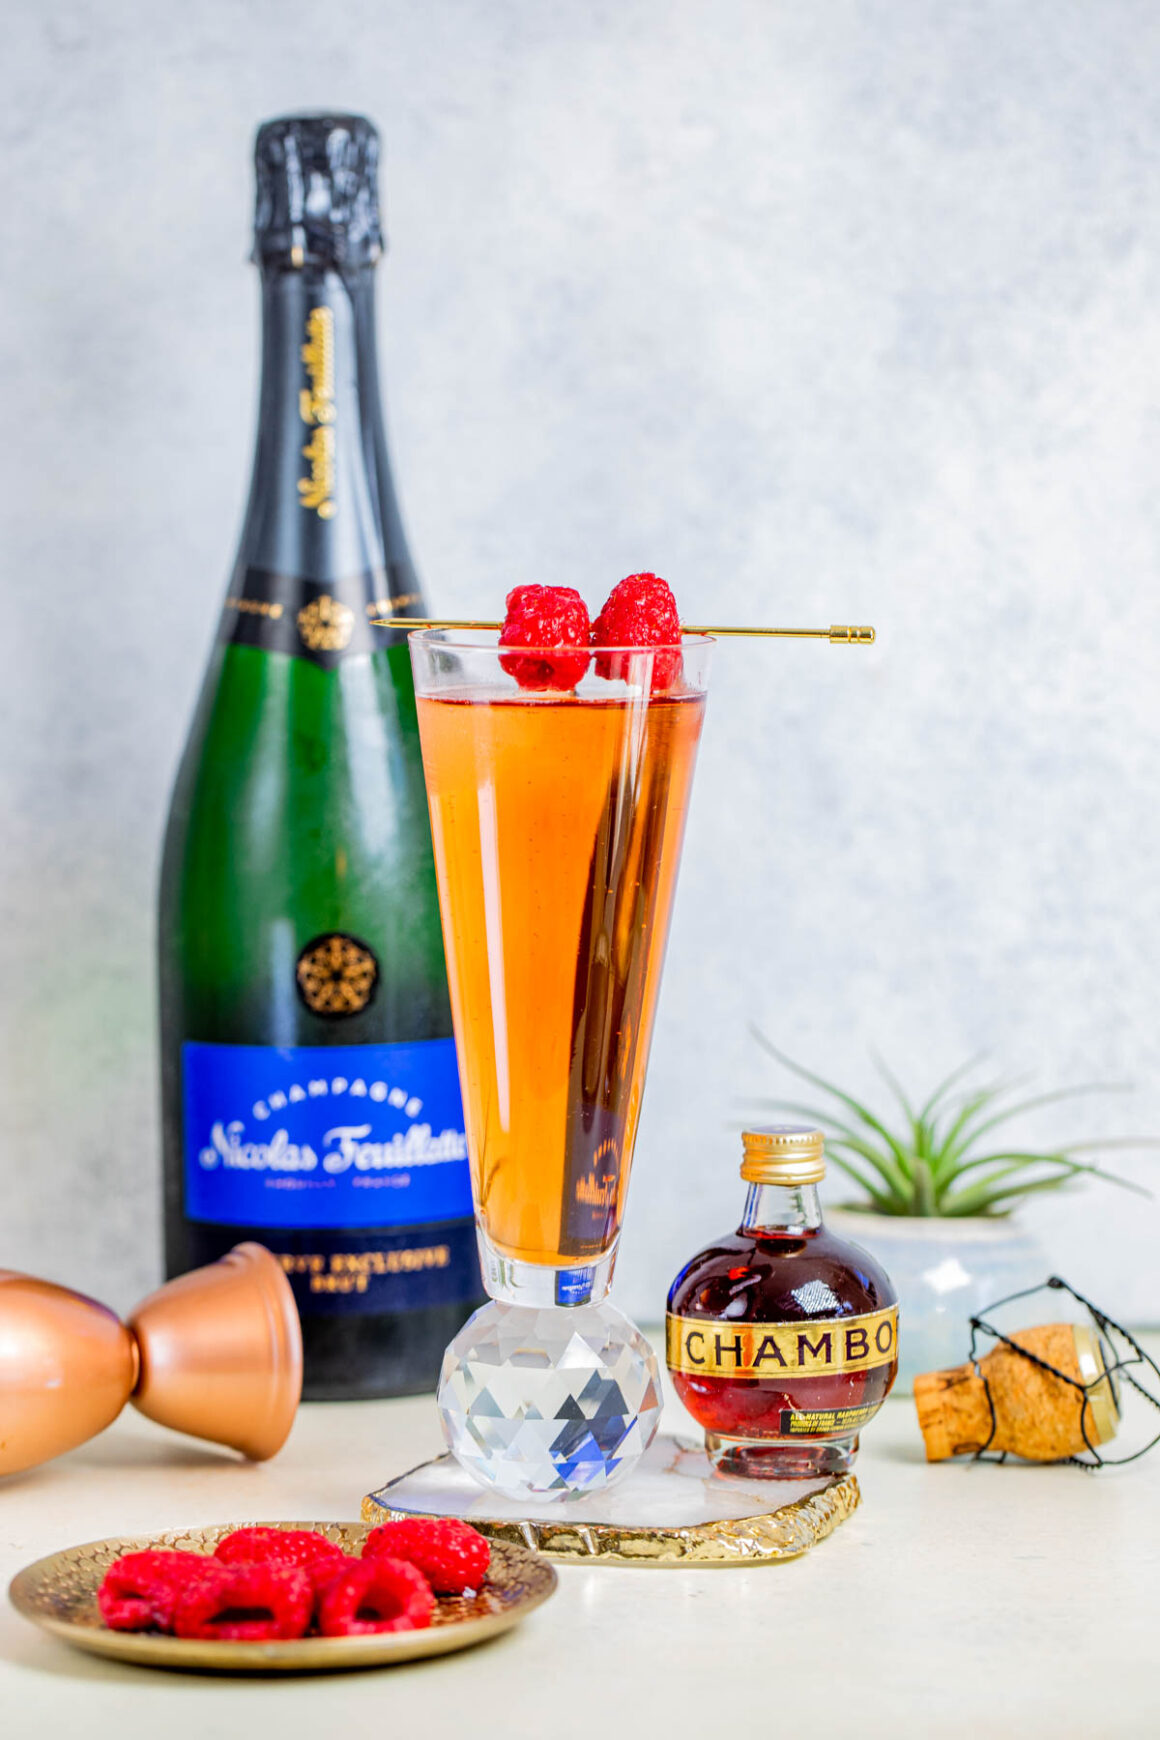 The Kir Royal cocktail is a delicious, elegant champagne cocktail that epitomizes sophistication and style.